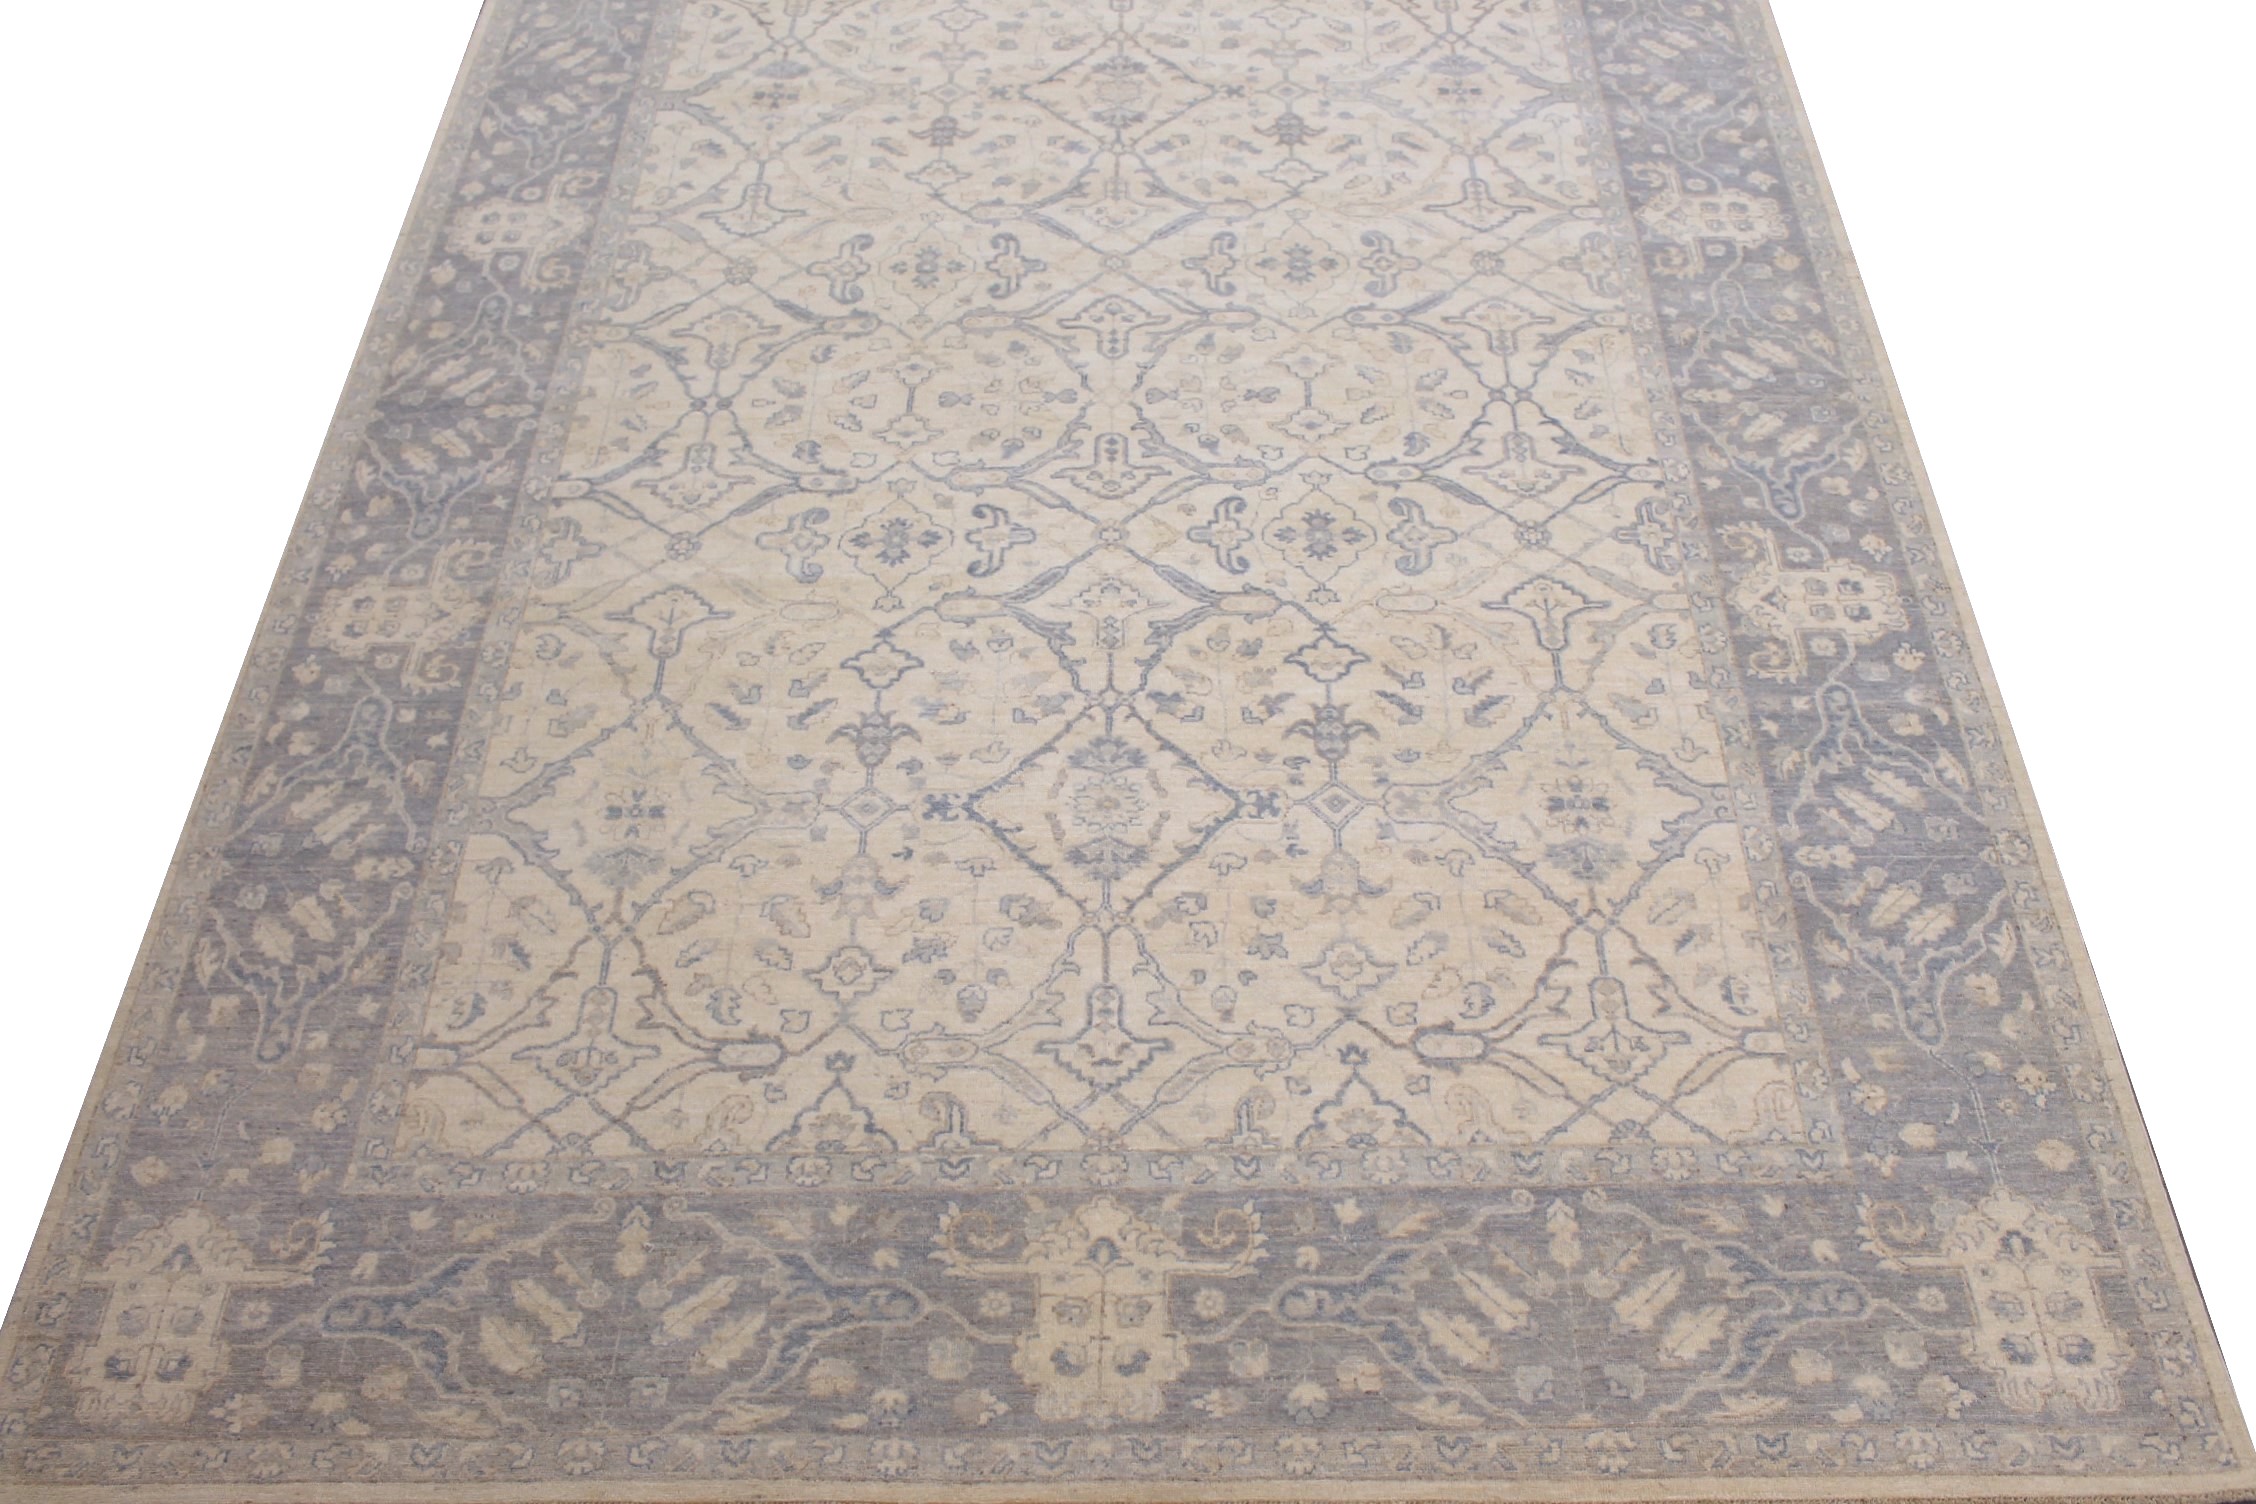 9x12 Peshawar Hand Knotted Wool Area Rug - MR026116